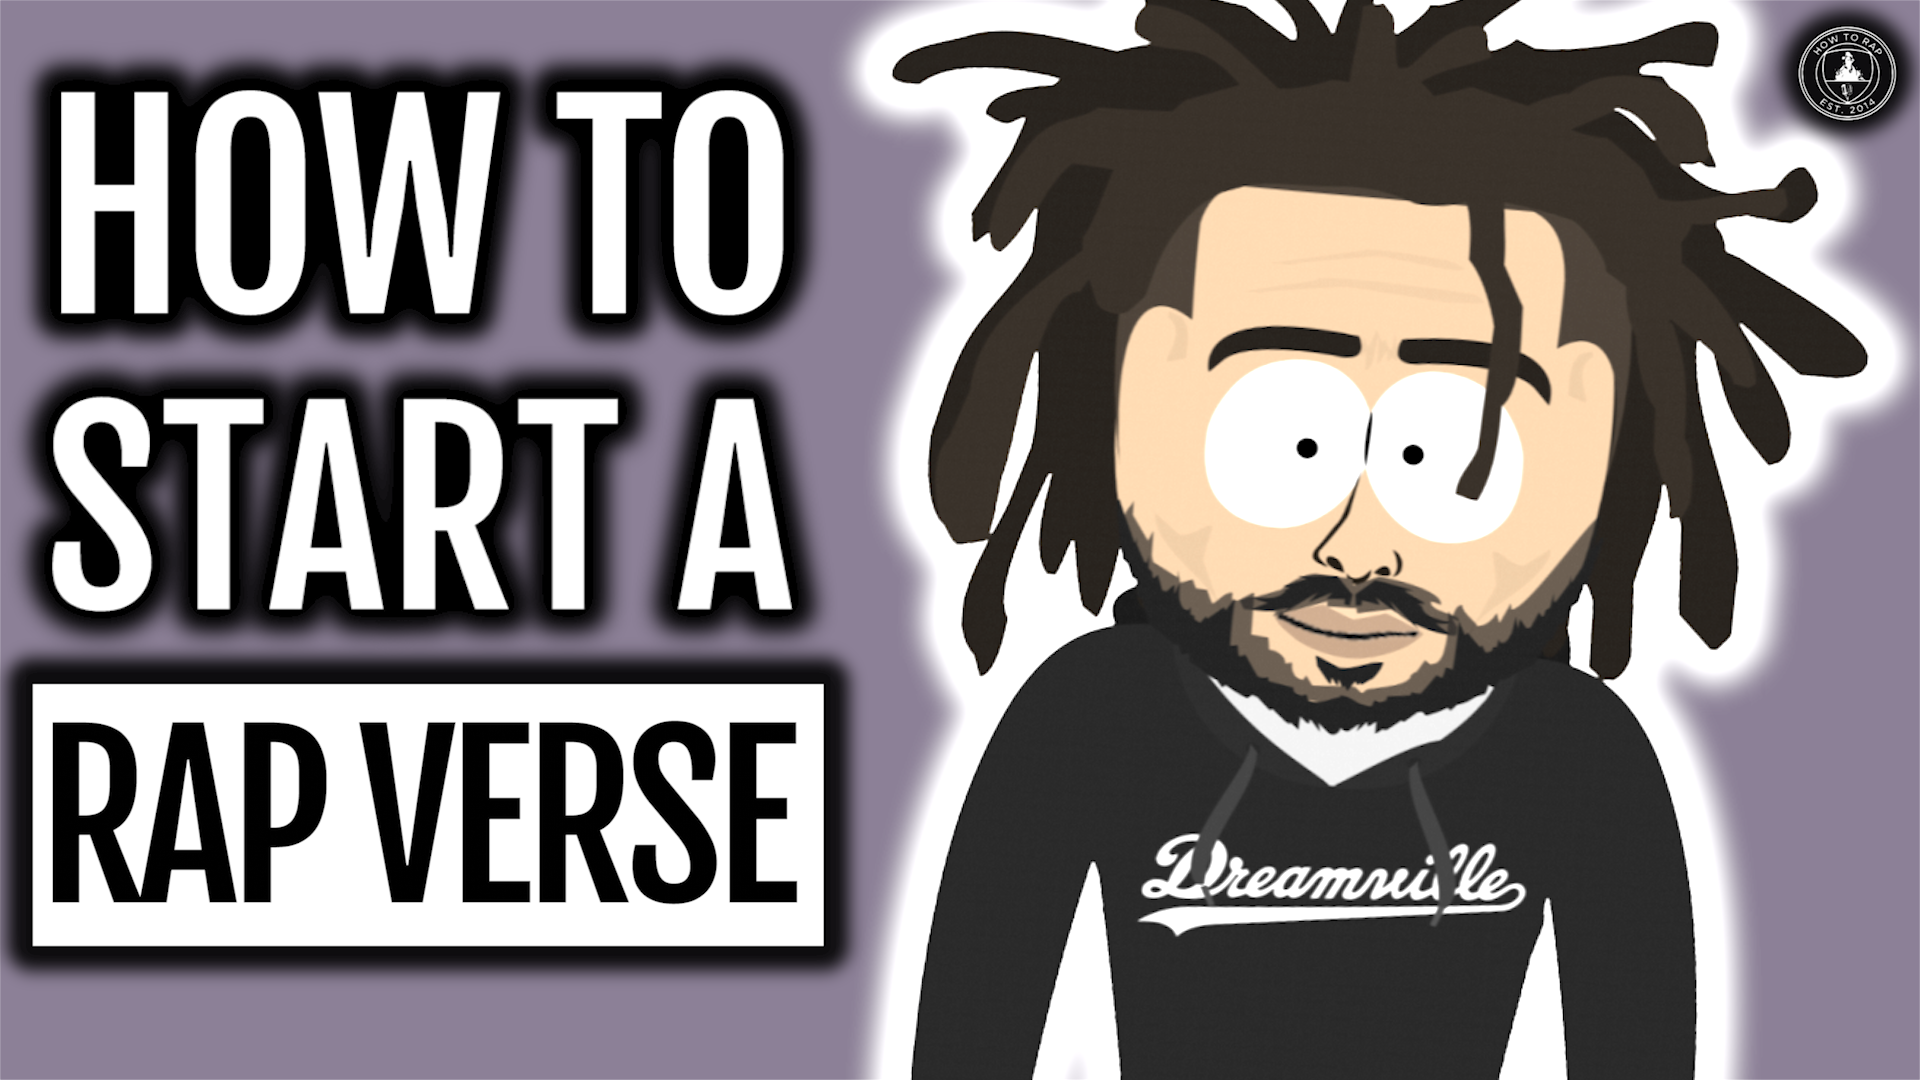 How To Start A Rap Verse: 4 Ways To INSTANTLY Rap Better